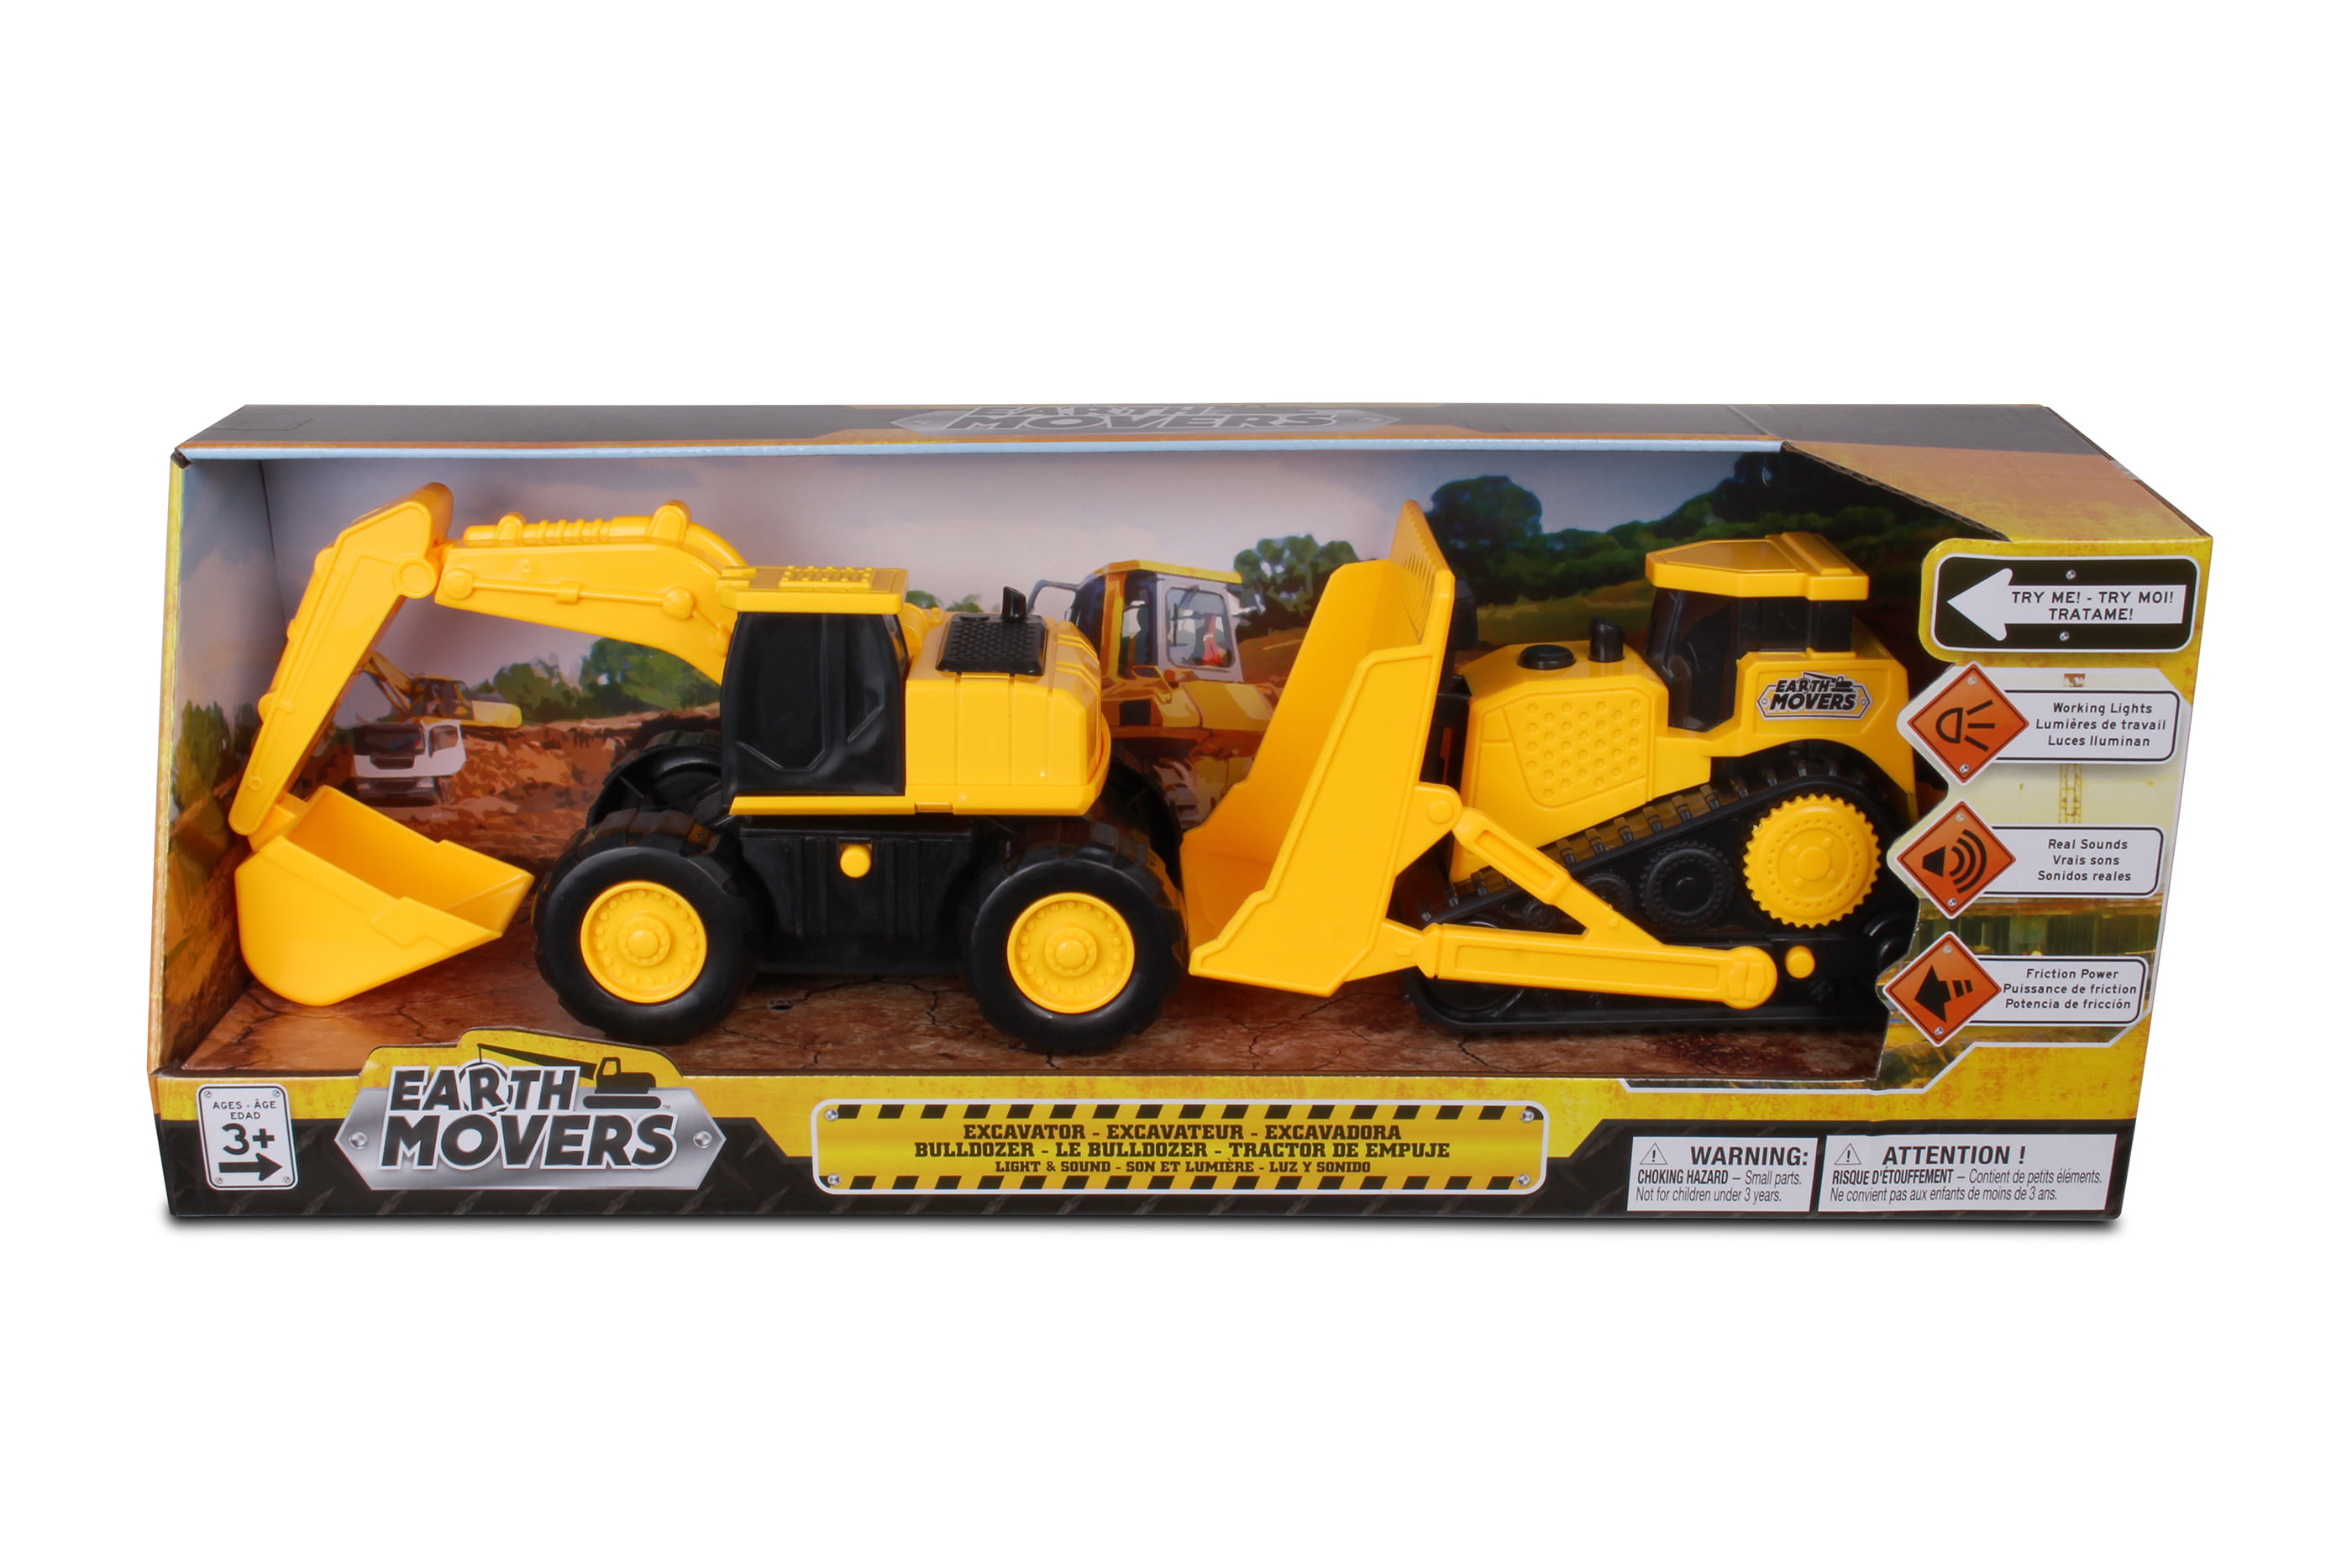 Tuff Trux 2-Pack Set Earth Movers Construction Vehicles 6 Dump Truck & Bulldozer Toy UPD Inc 